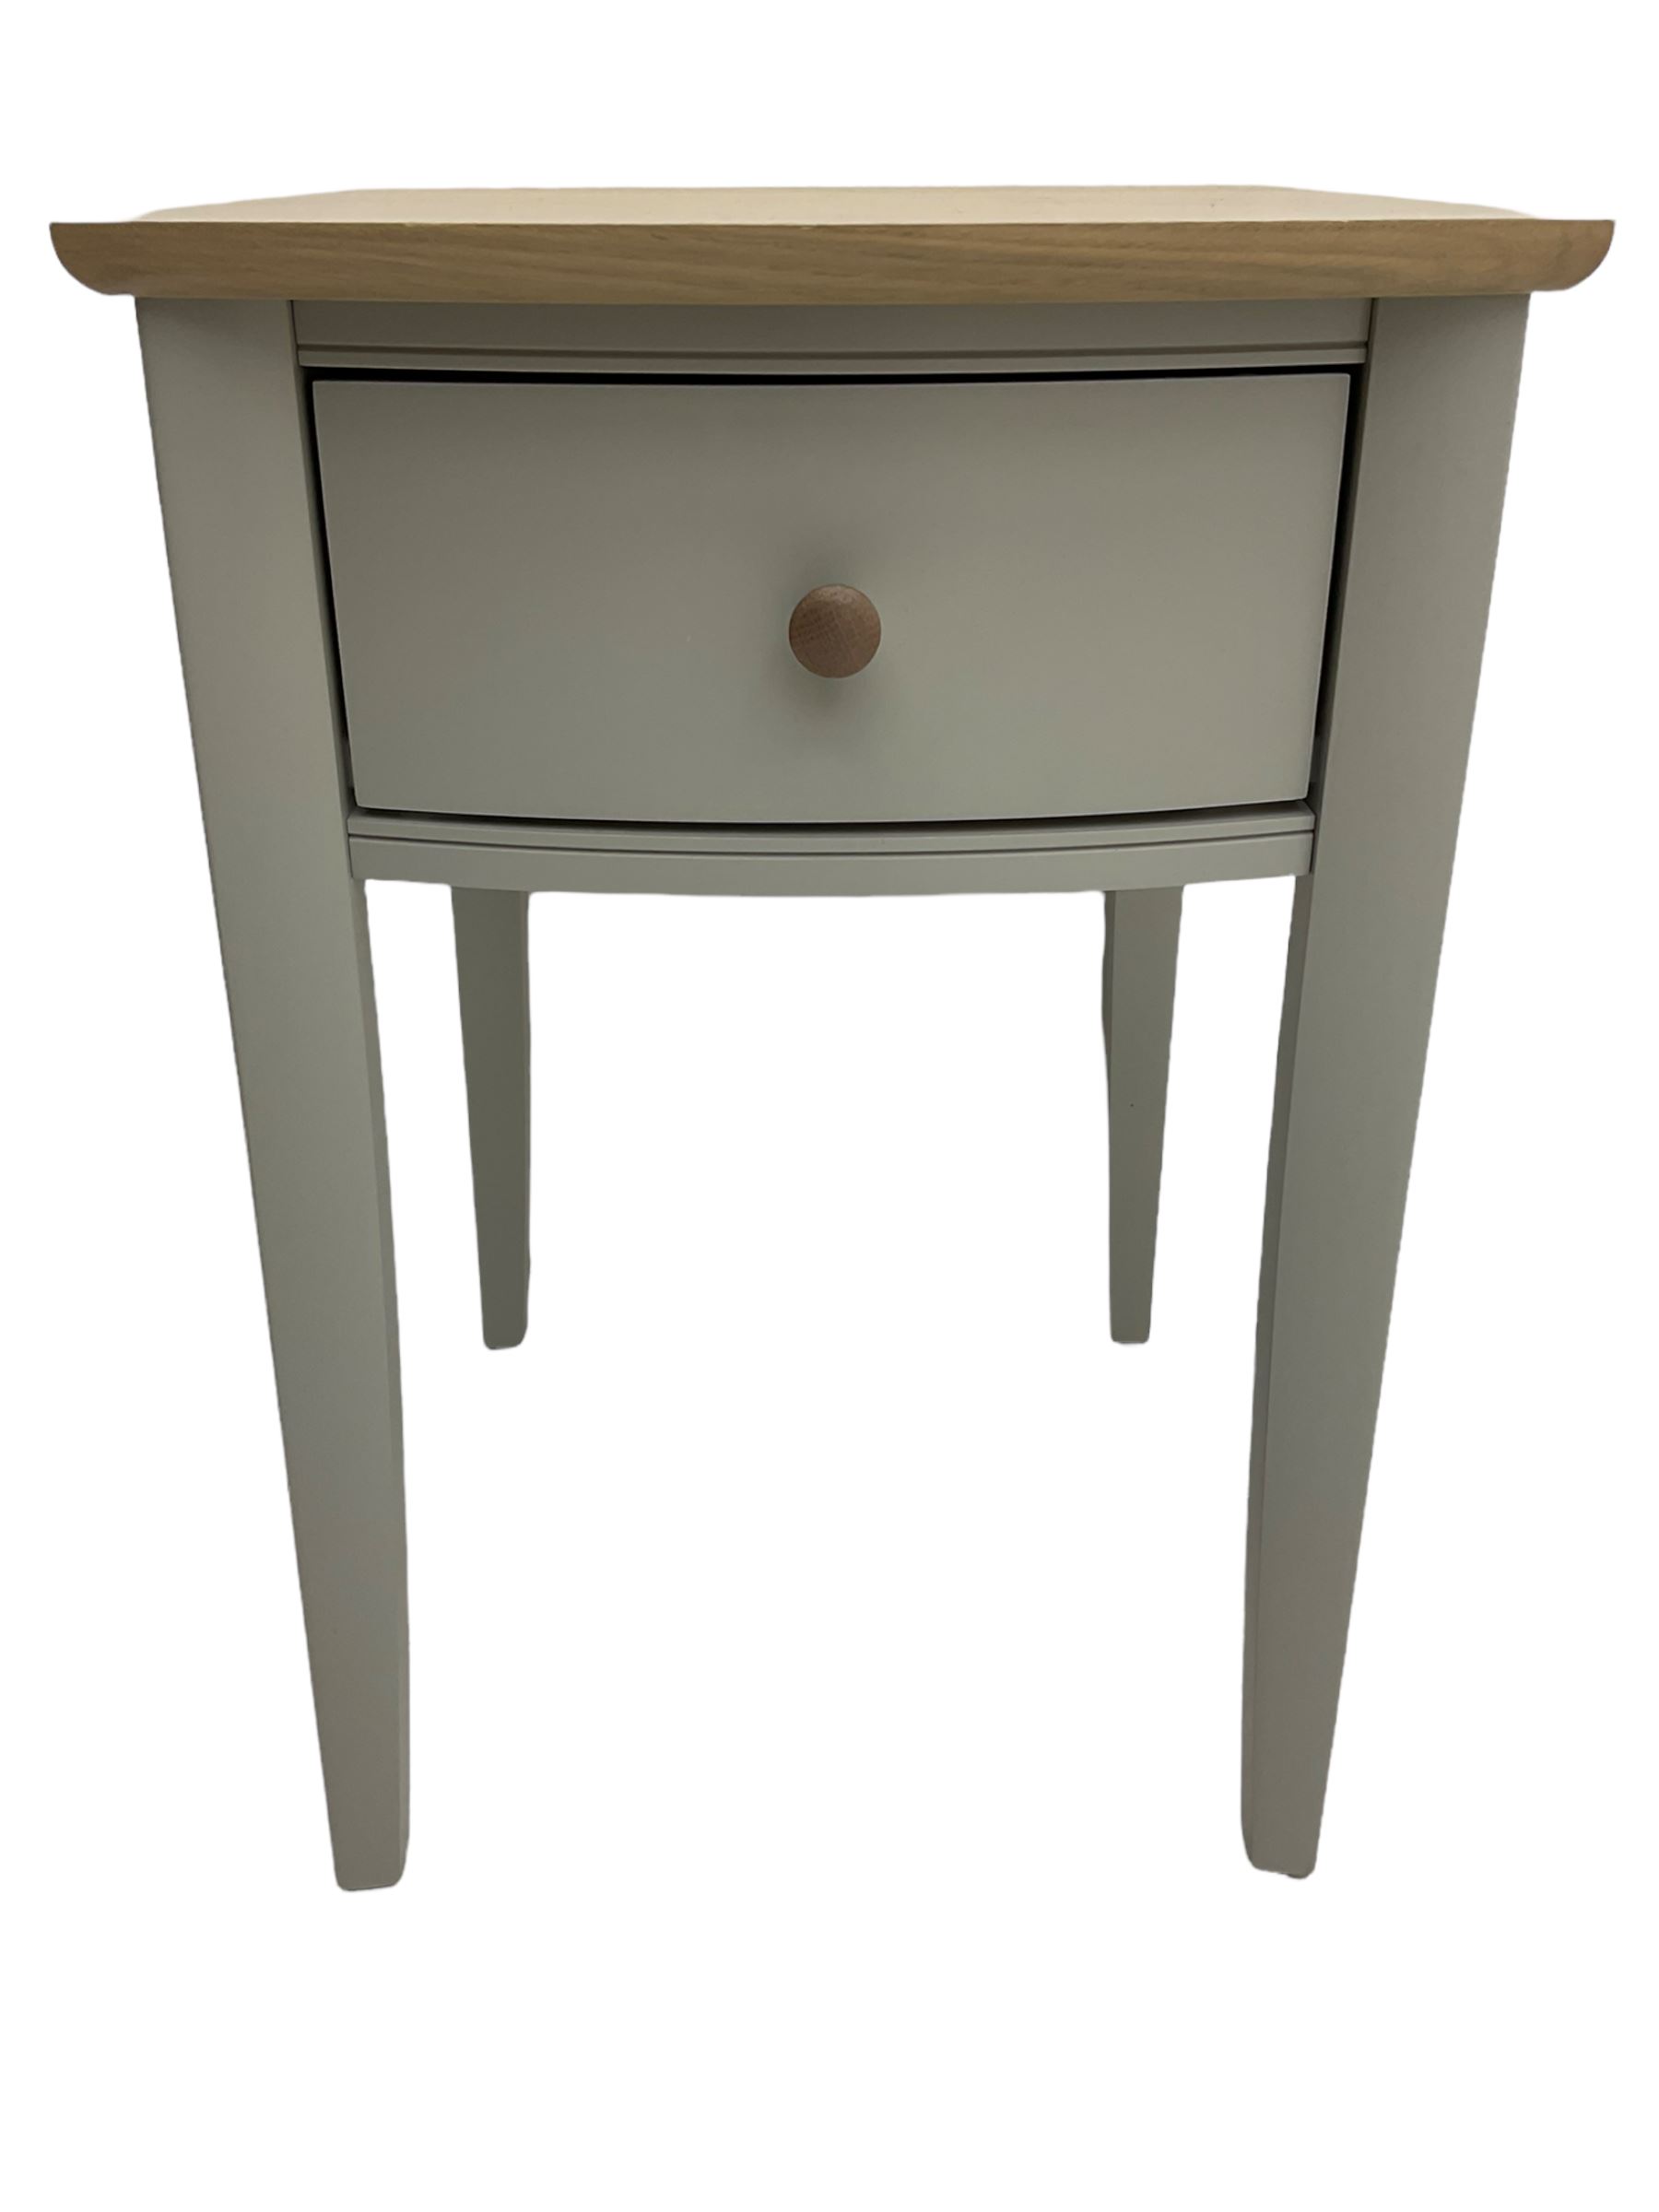 Pair of grey and oak finish bedside lamp tables - Image 2 of 4